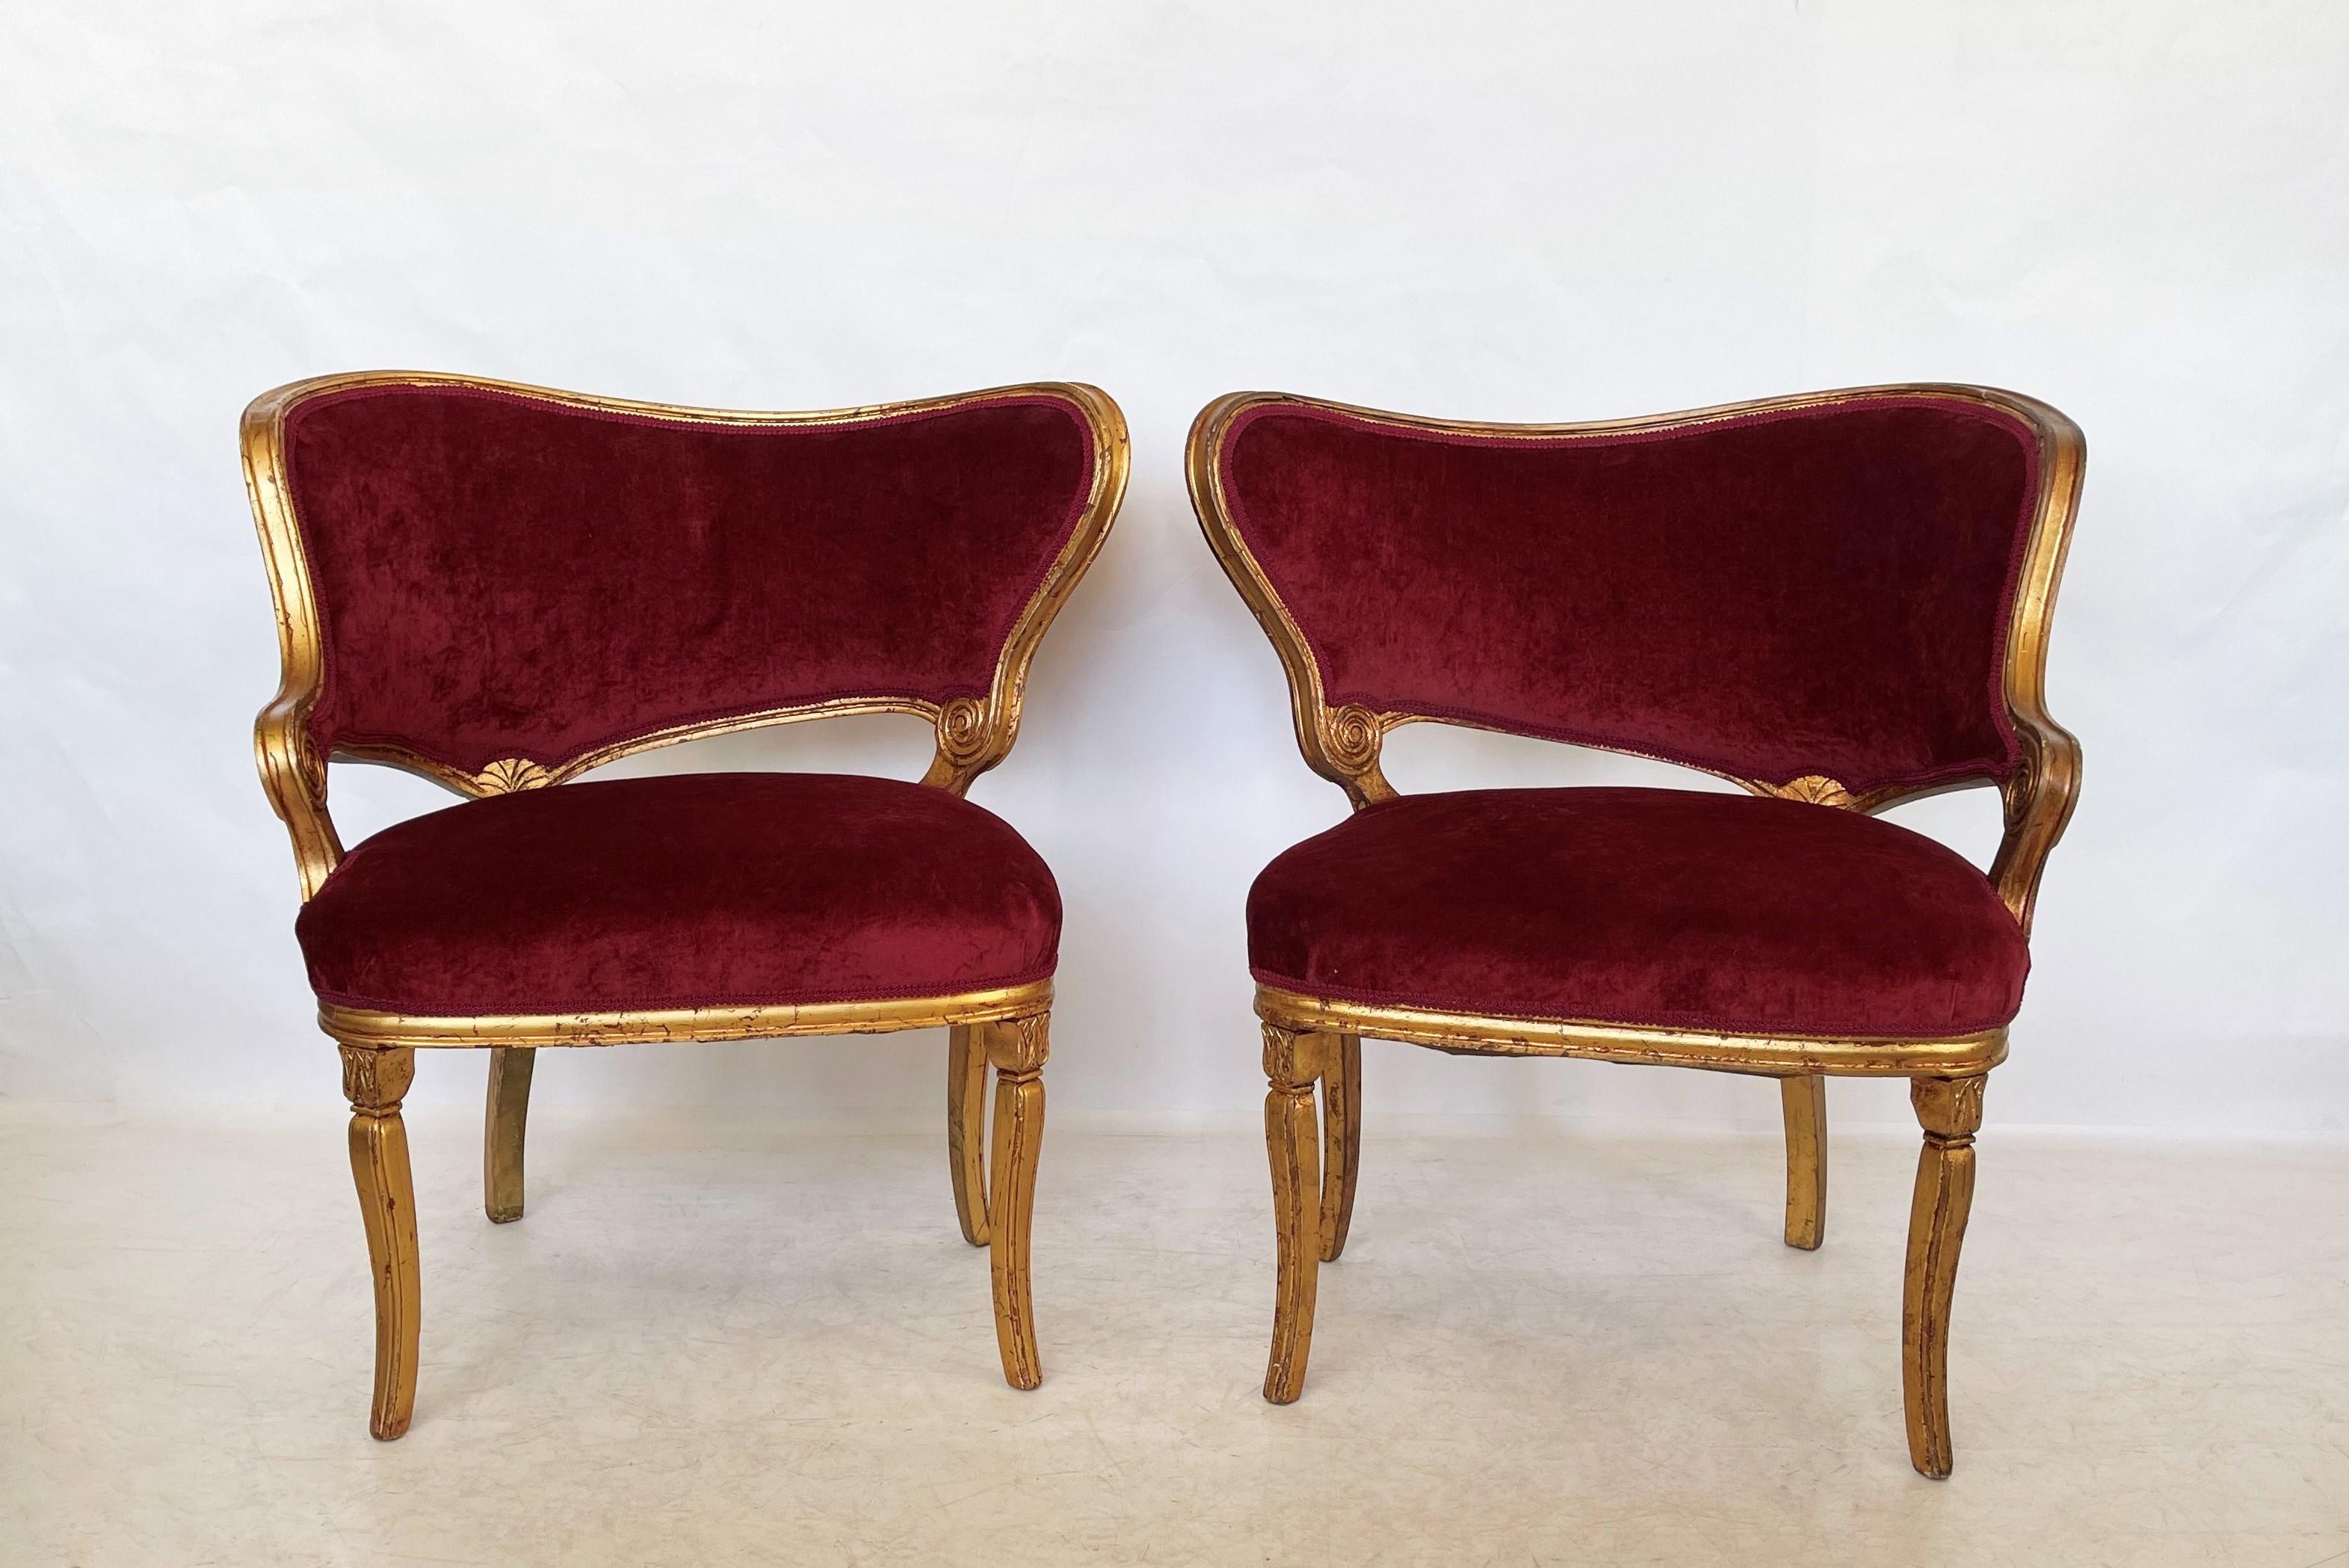 American Pair of Hollywood Regency Fireside Chairs Attributed to Grosfeld House For Sale